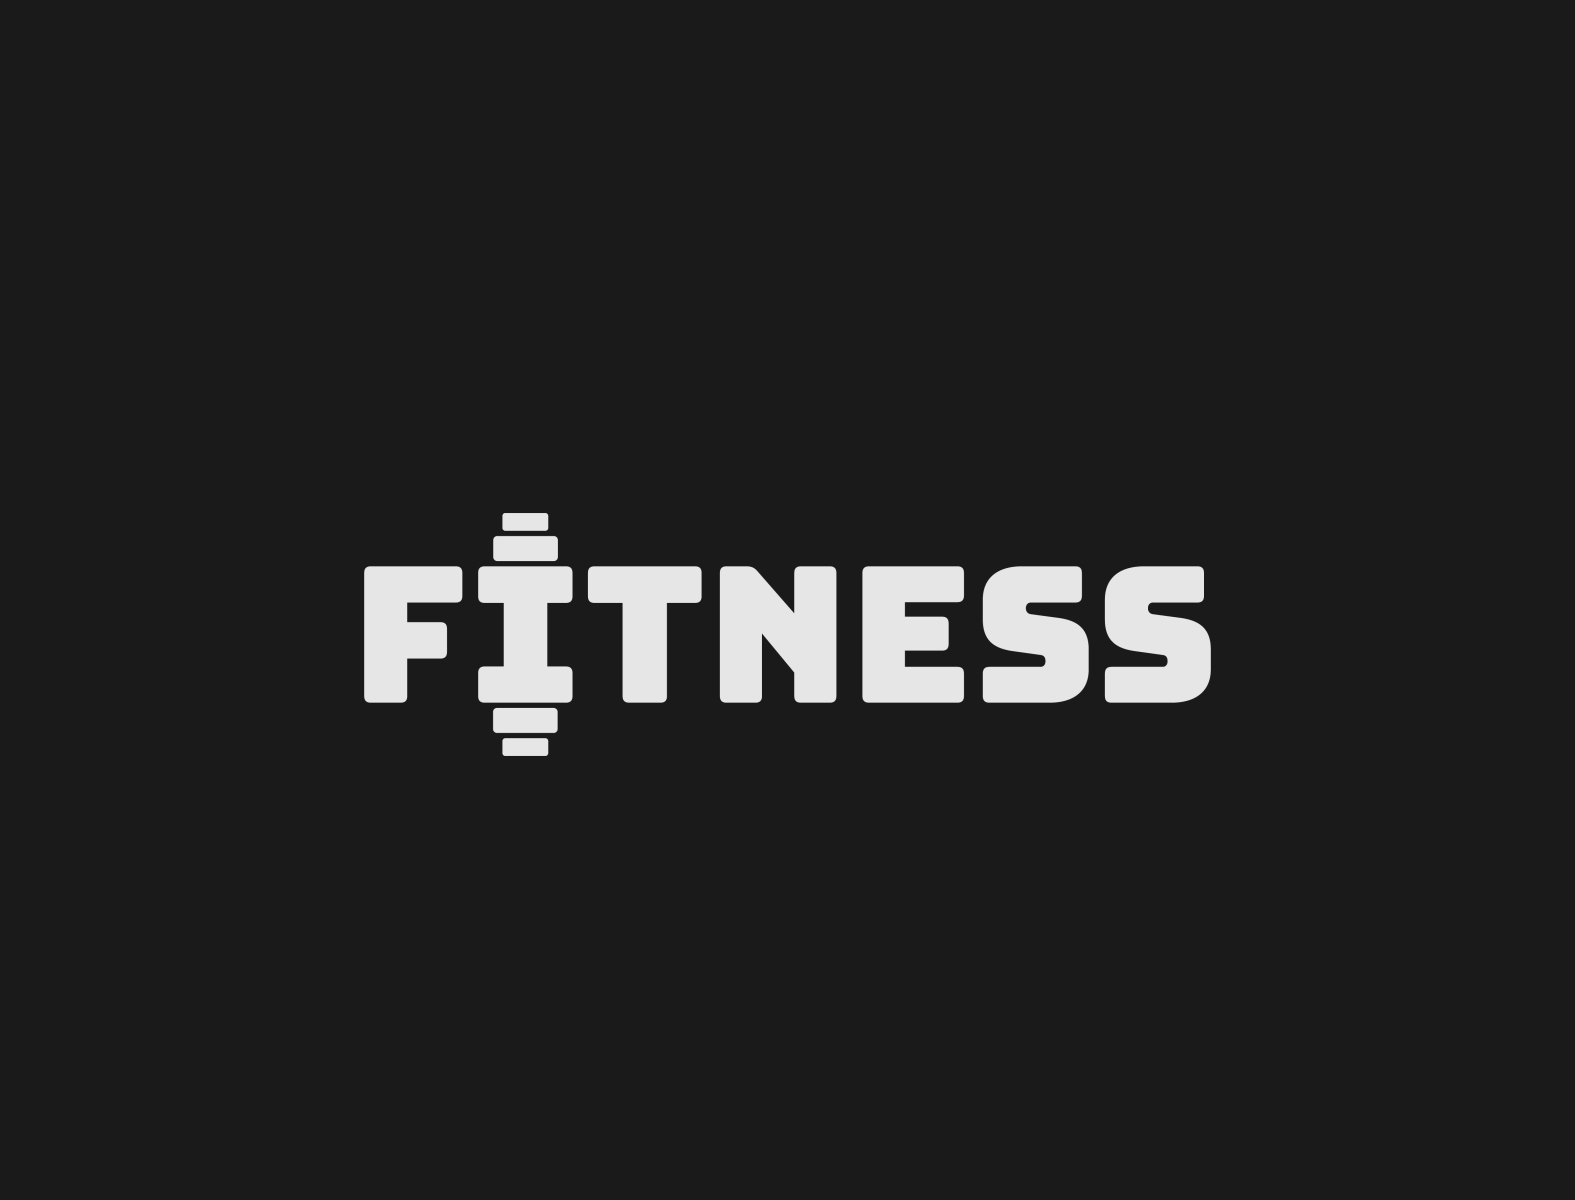 Fitness logo concept by MyGraphicLab on Dribbble